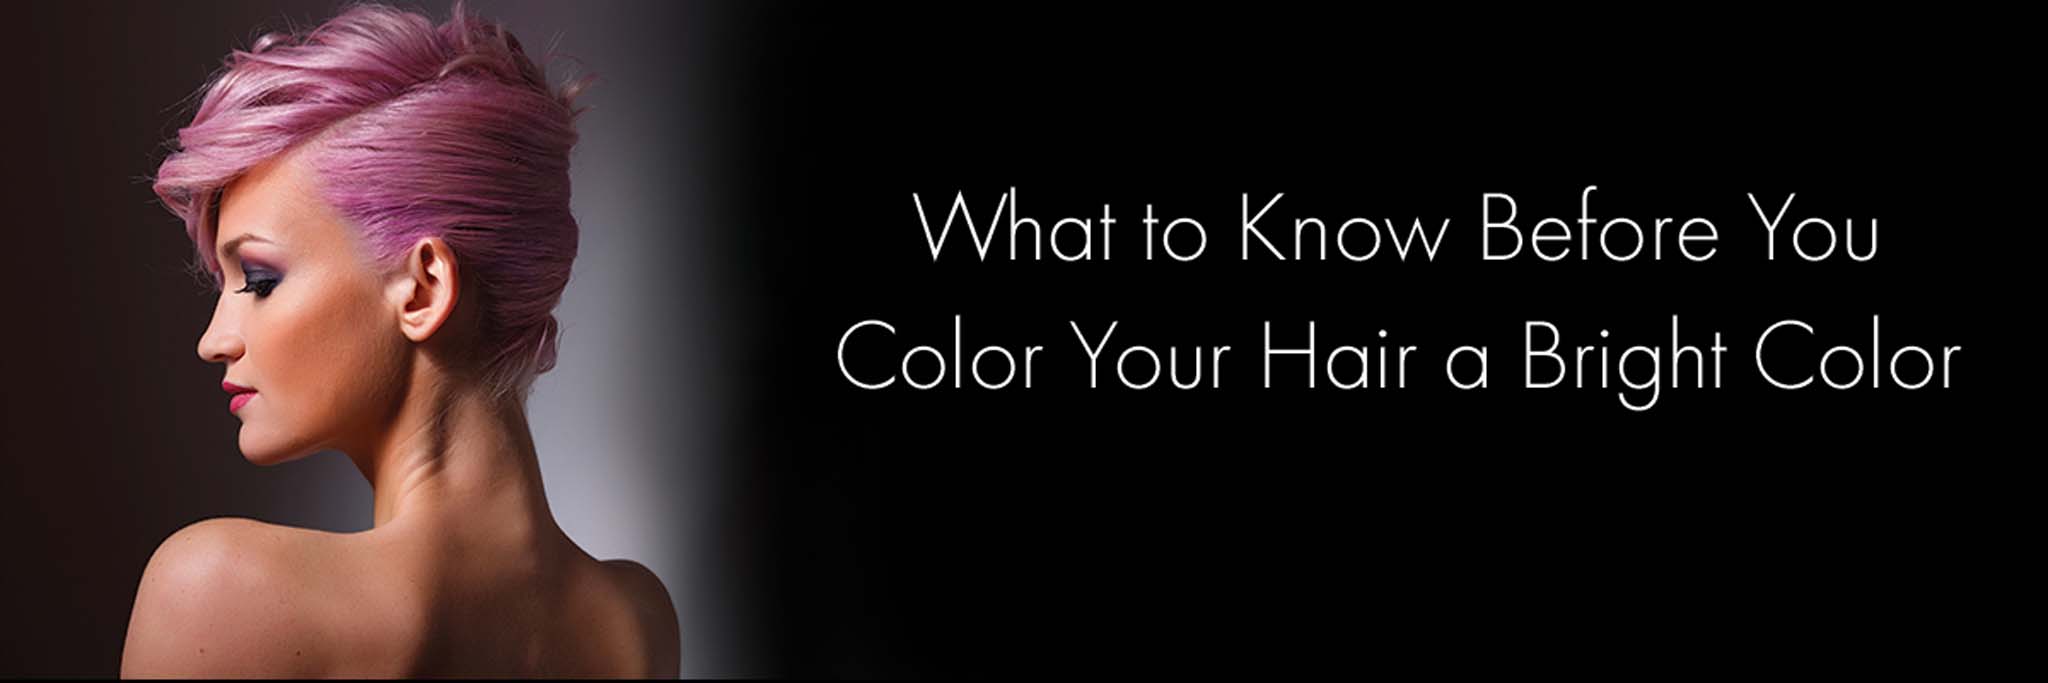 what to know before you color you hair a bright color